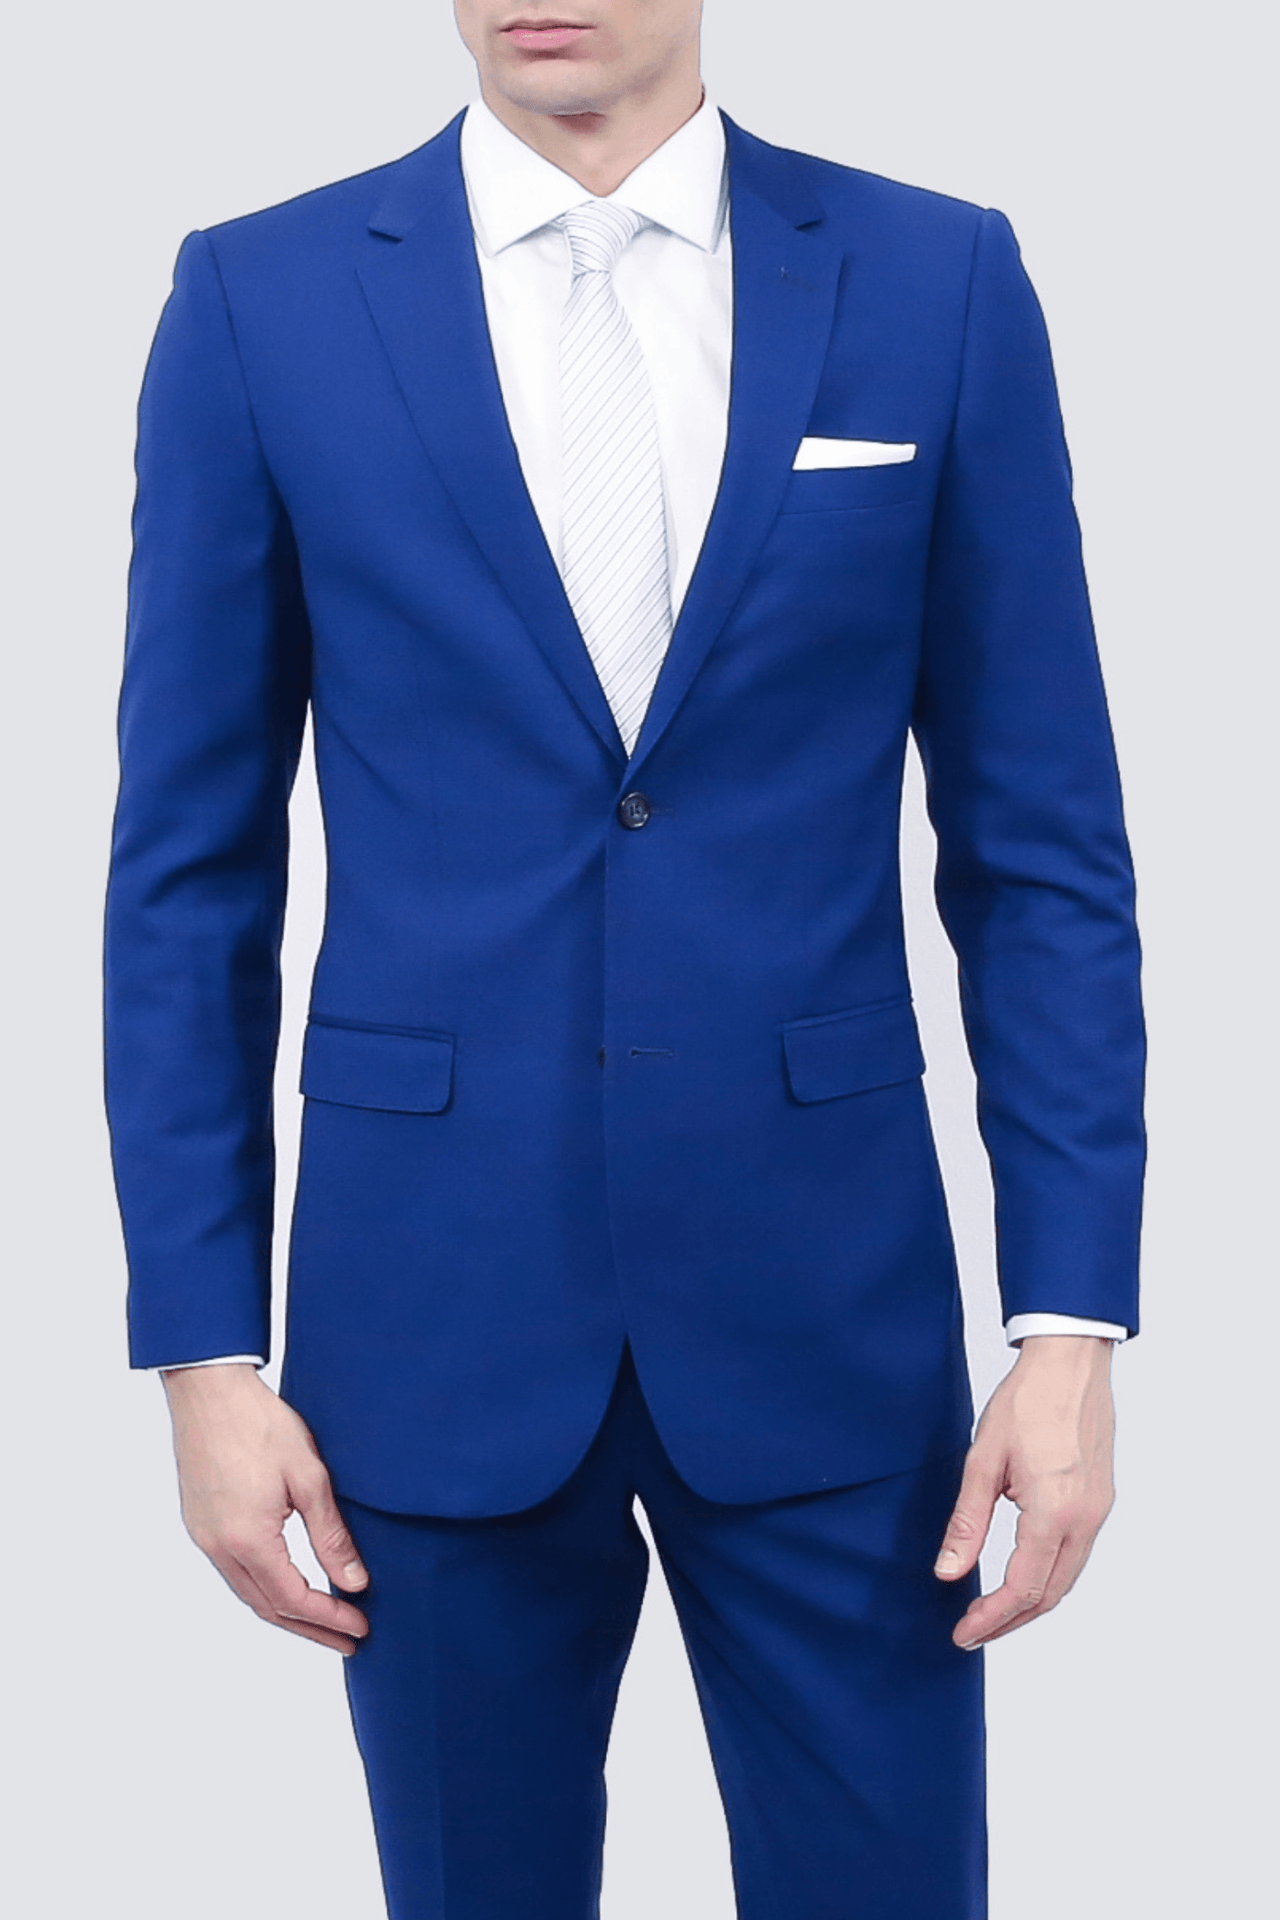 Royal Blue Suit Made In Italy  French Connection Bright Blue Suit